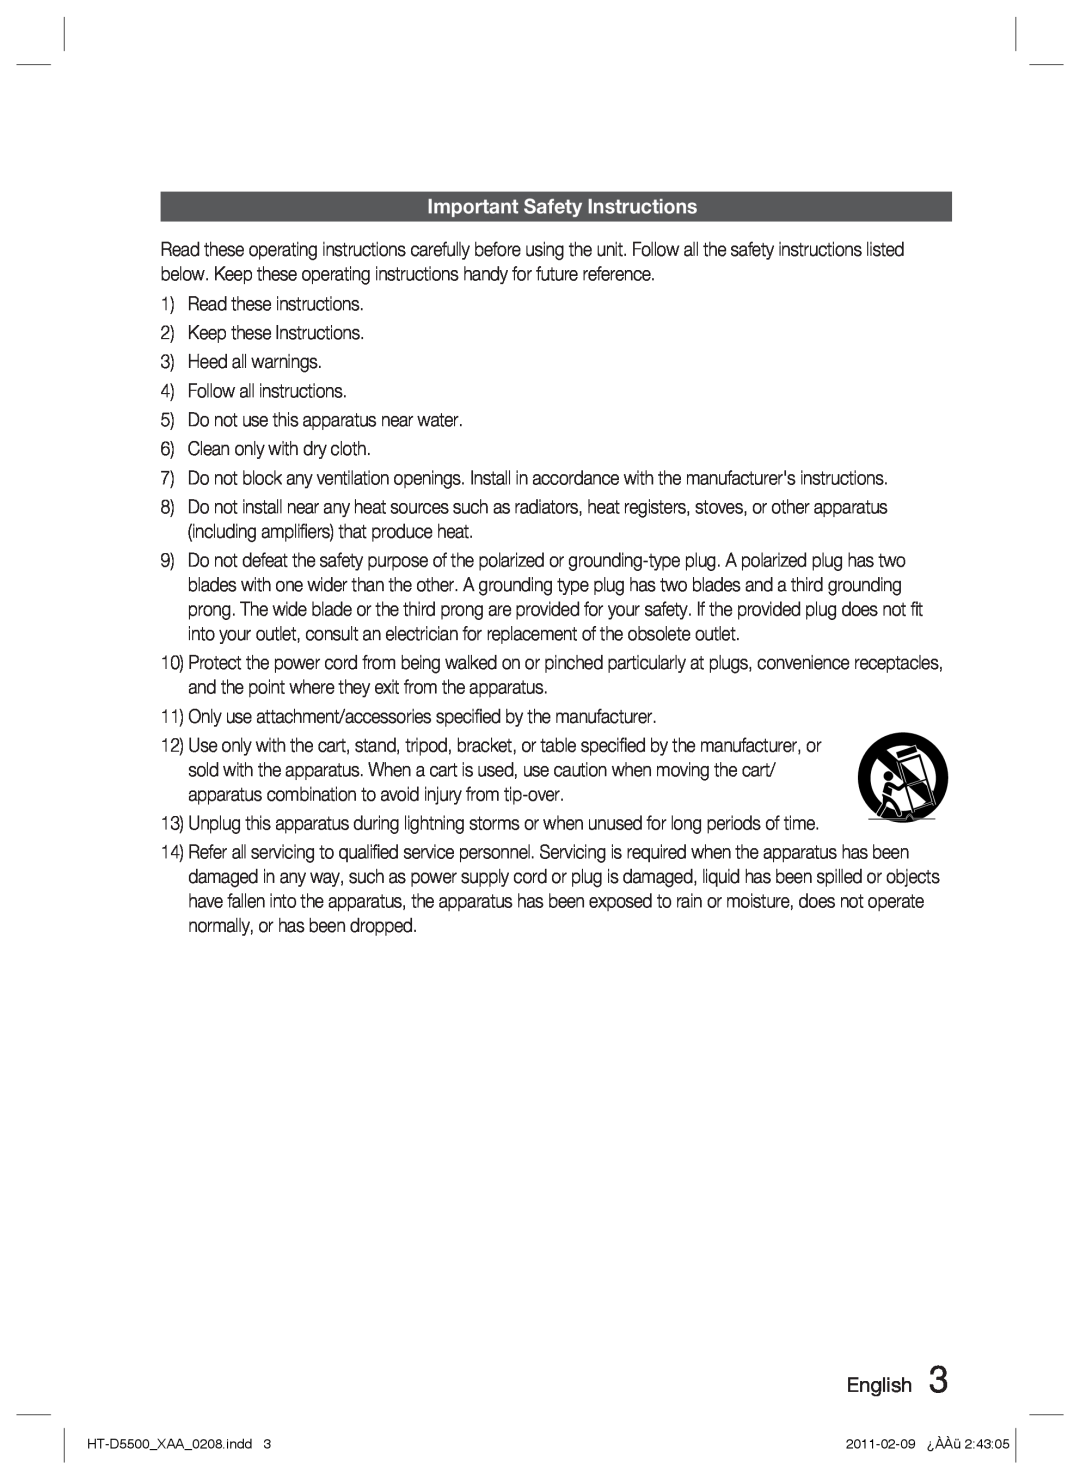 Samsung D5500 user manual Important Safety Instructions, English 